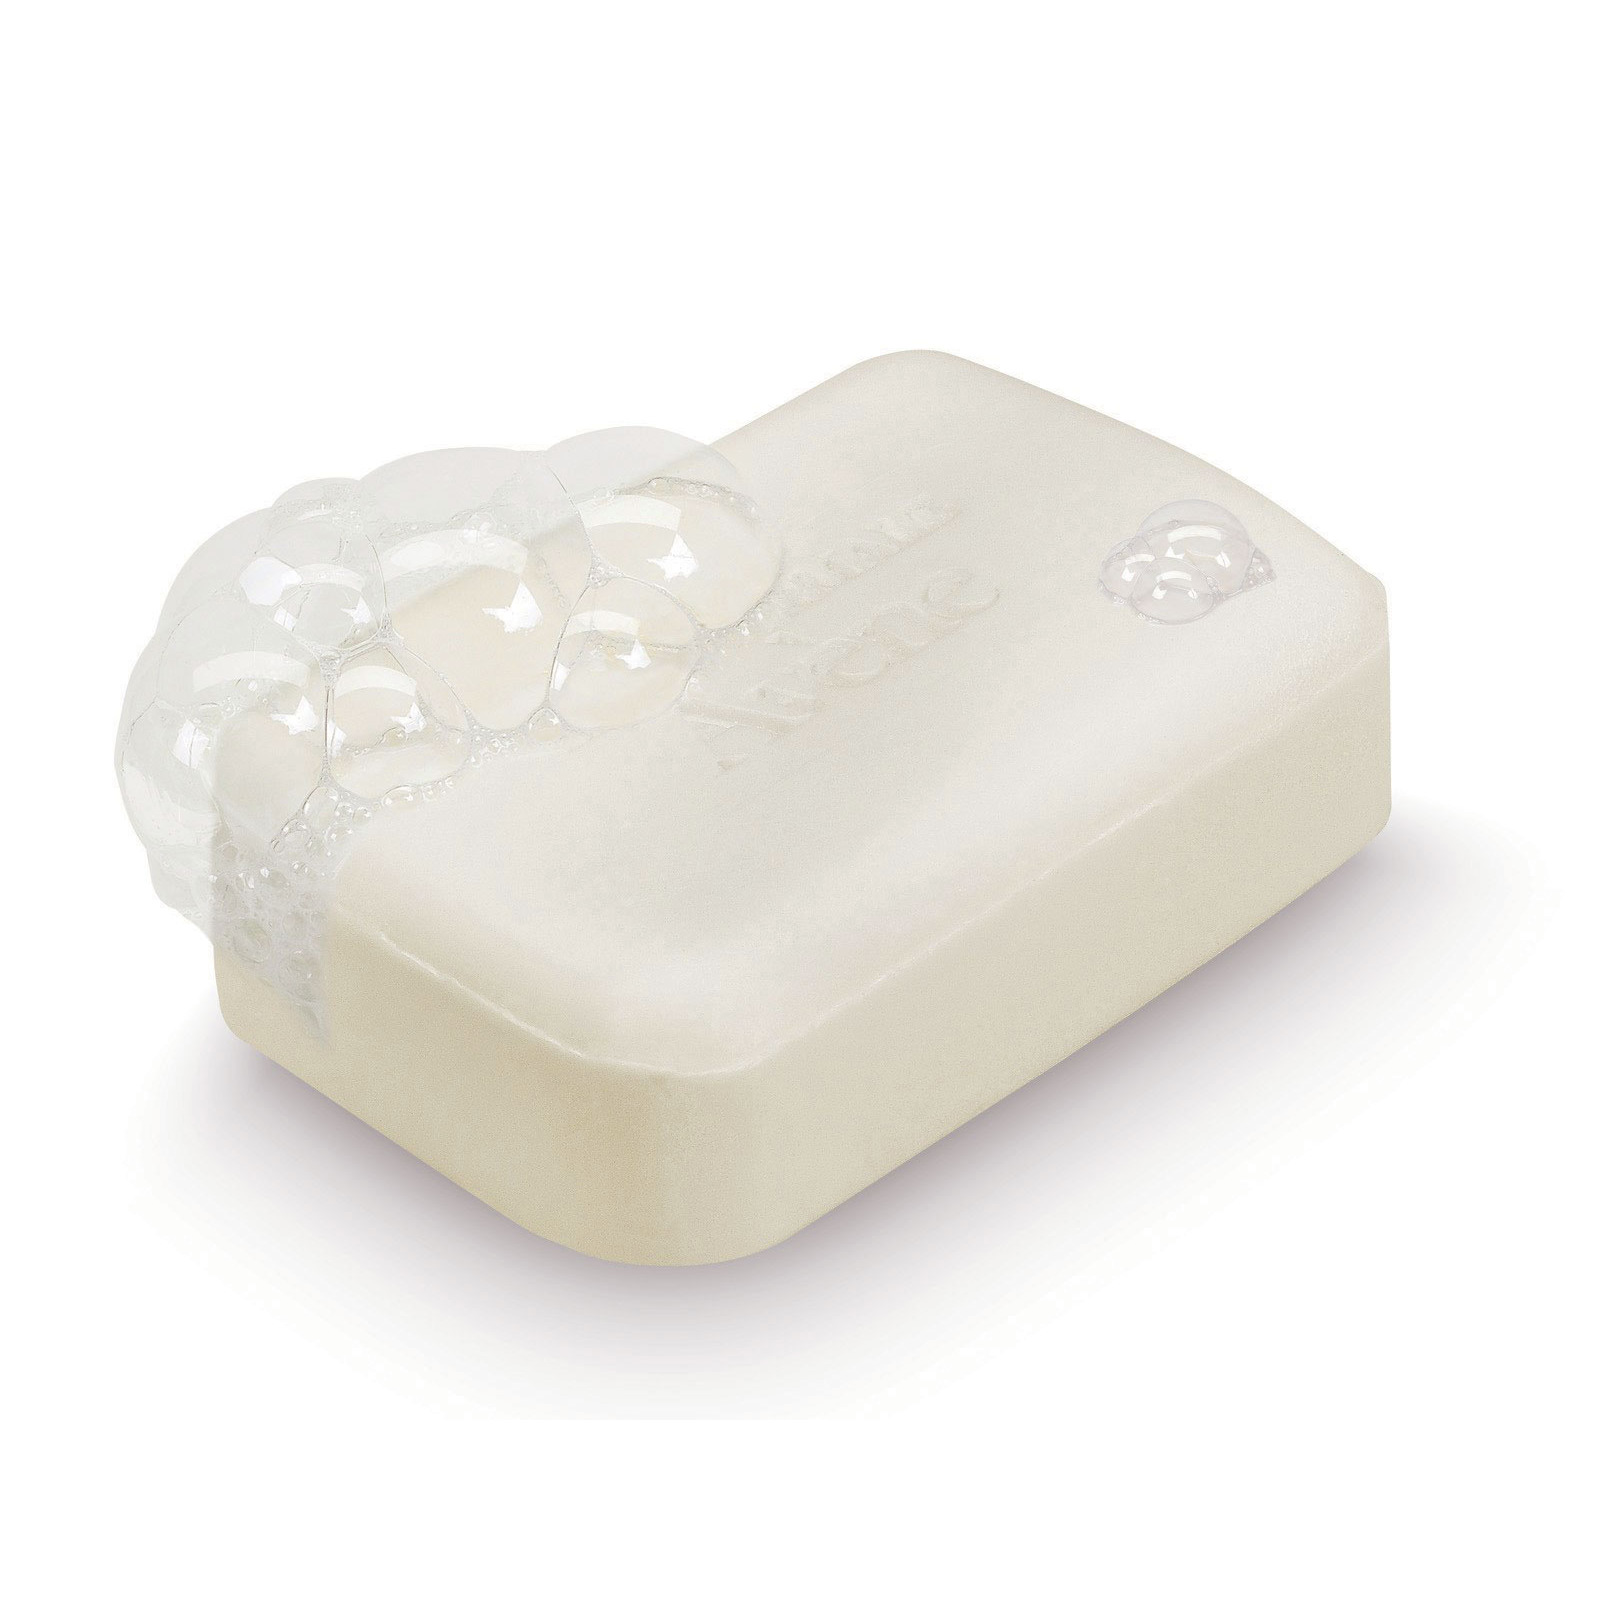 Soap Png Free & Free Soap.png Transparent Images #6826.